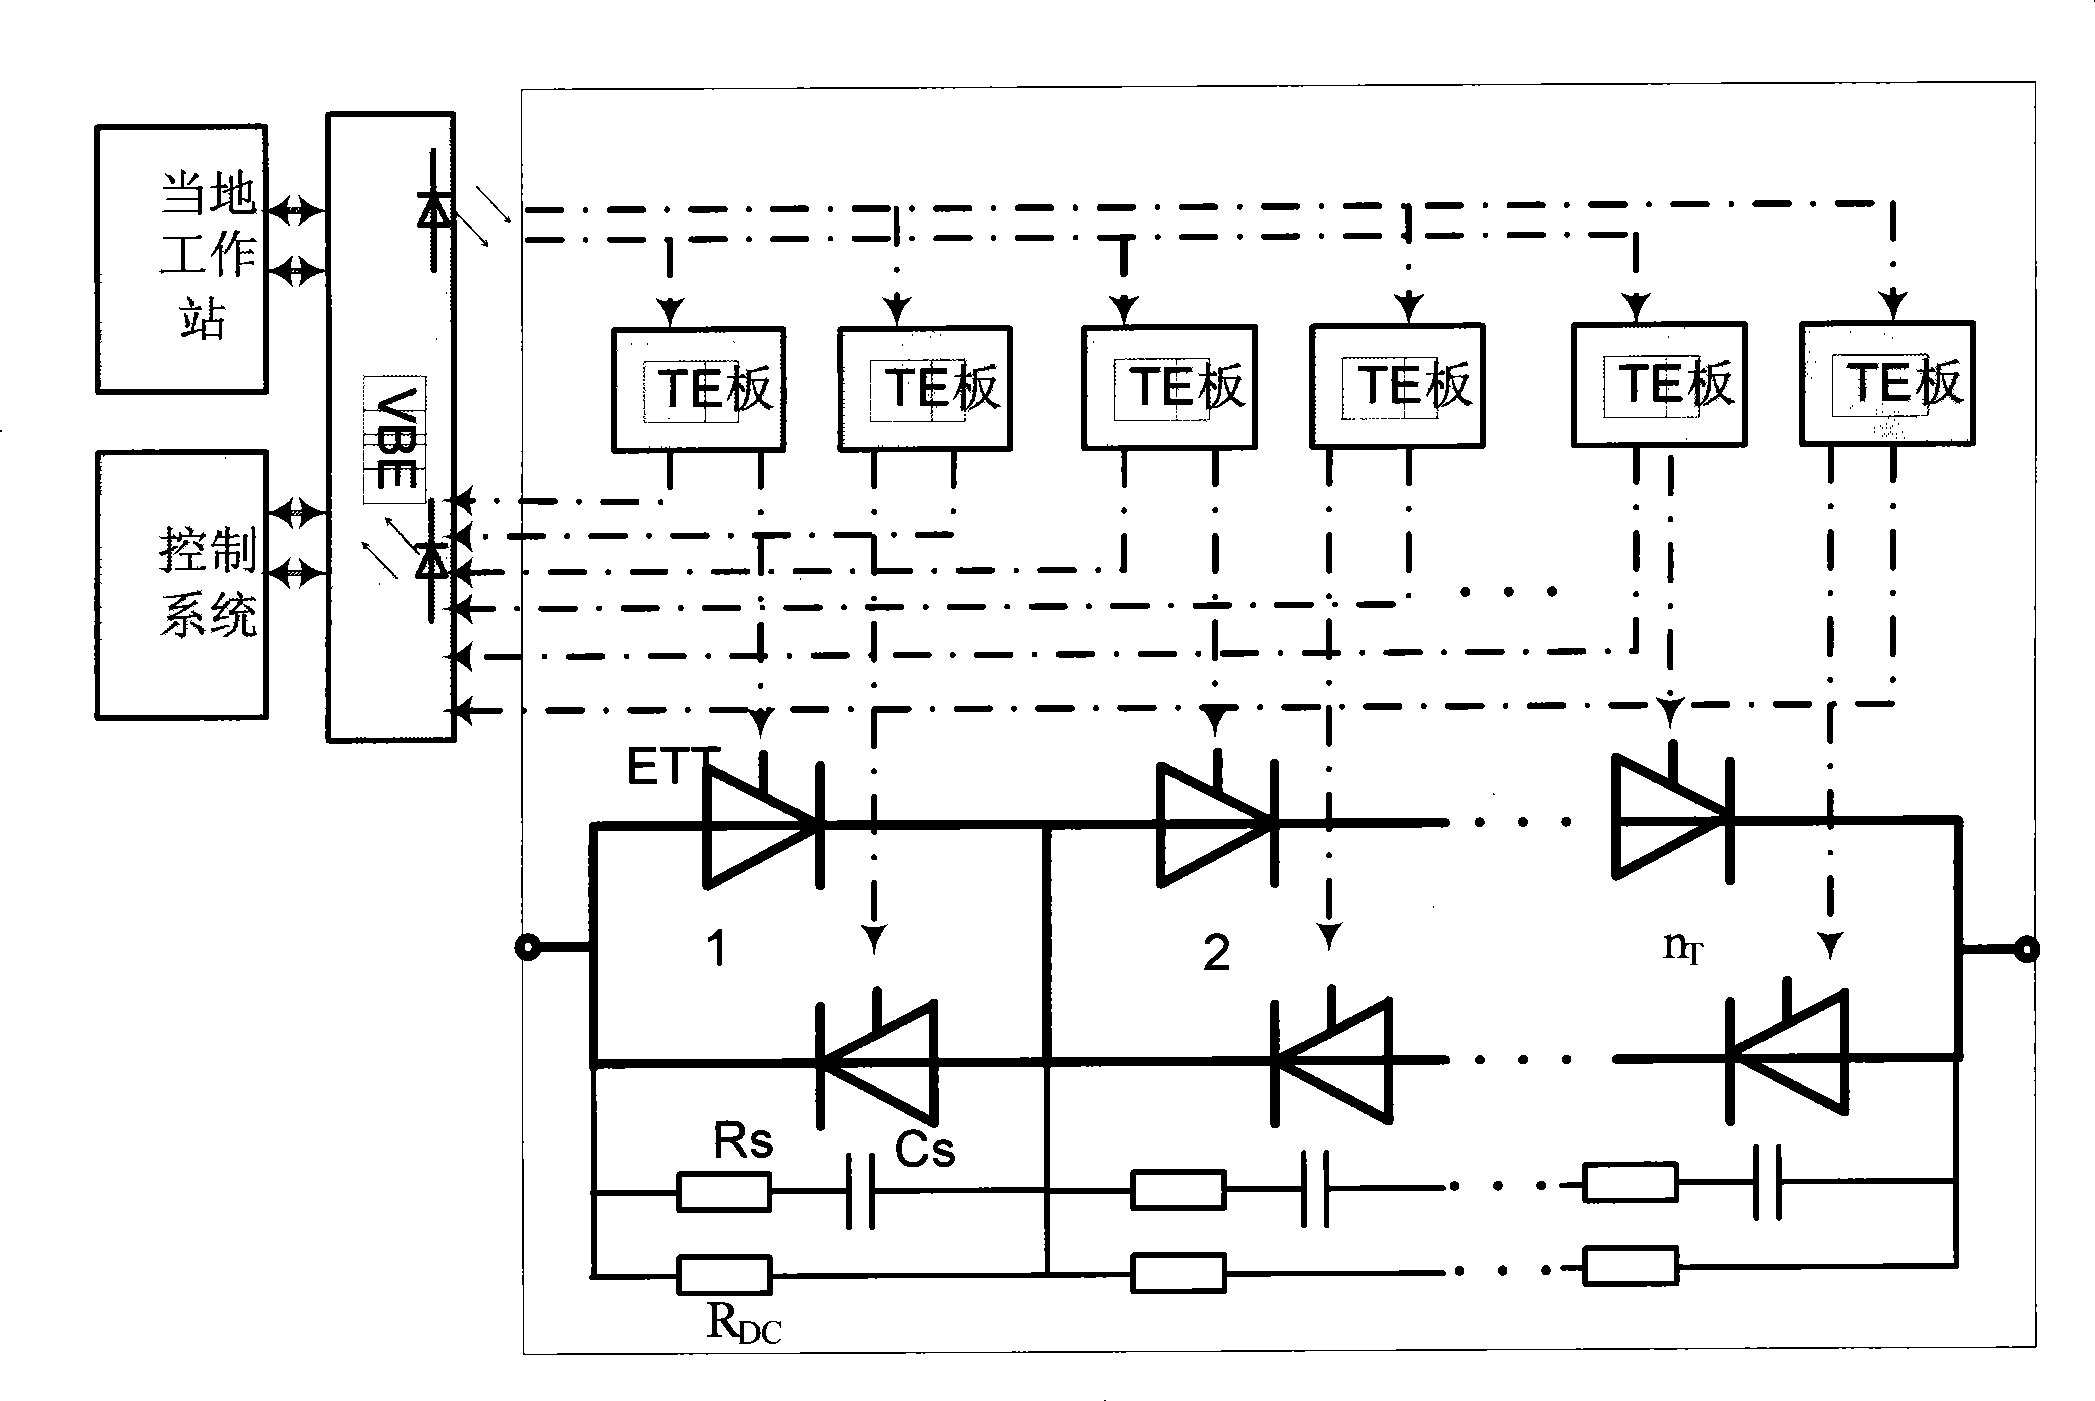 Device for breakdown diode to initiatively trigger bypass of thyristor valve string